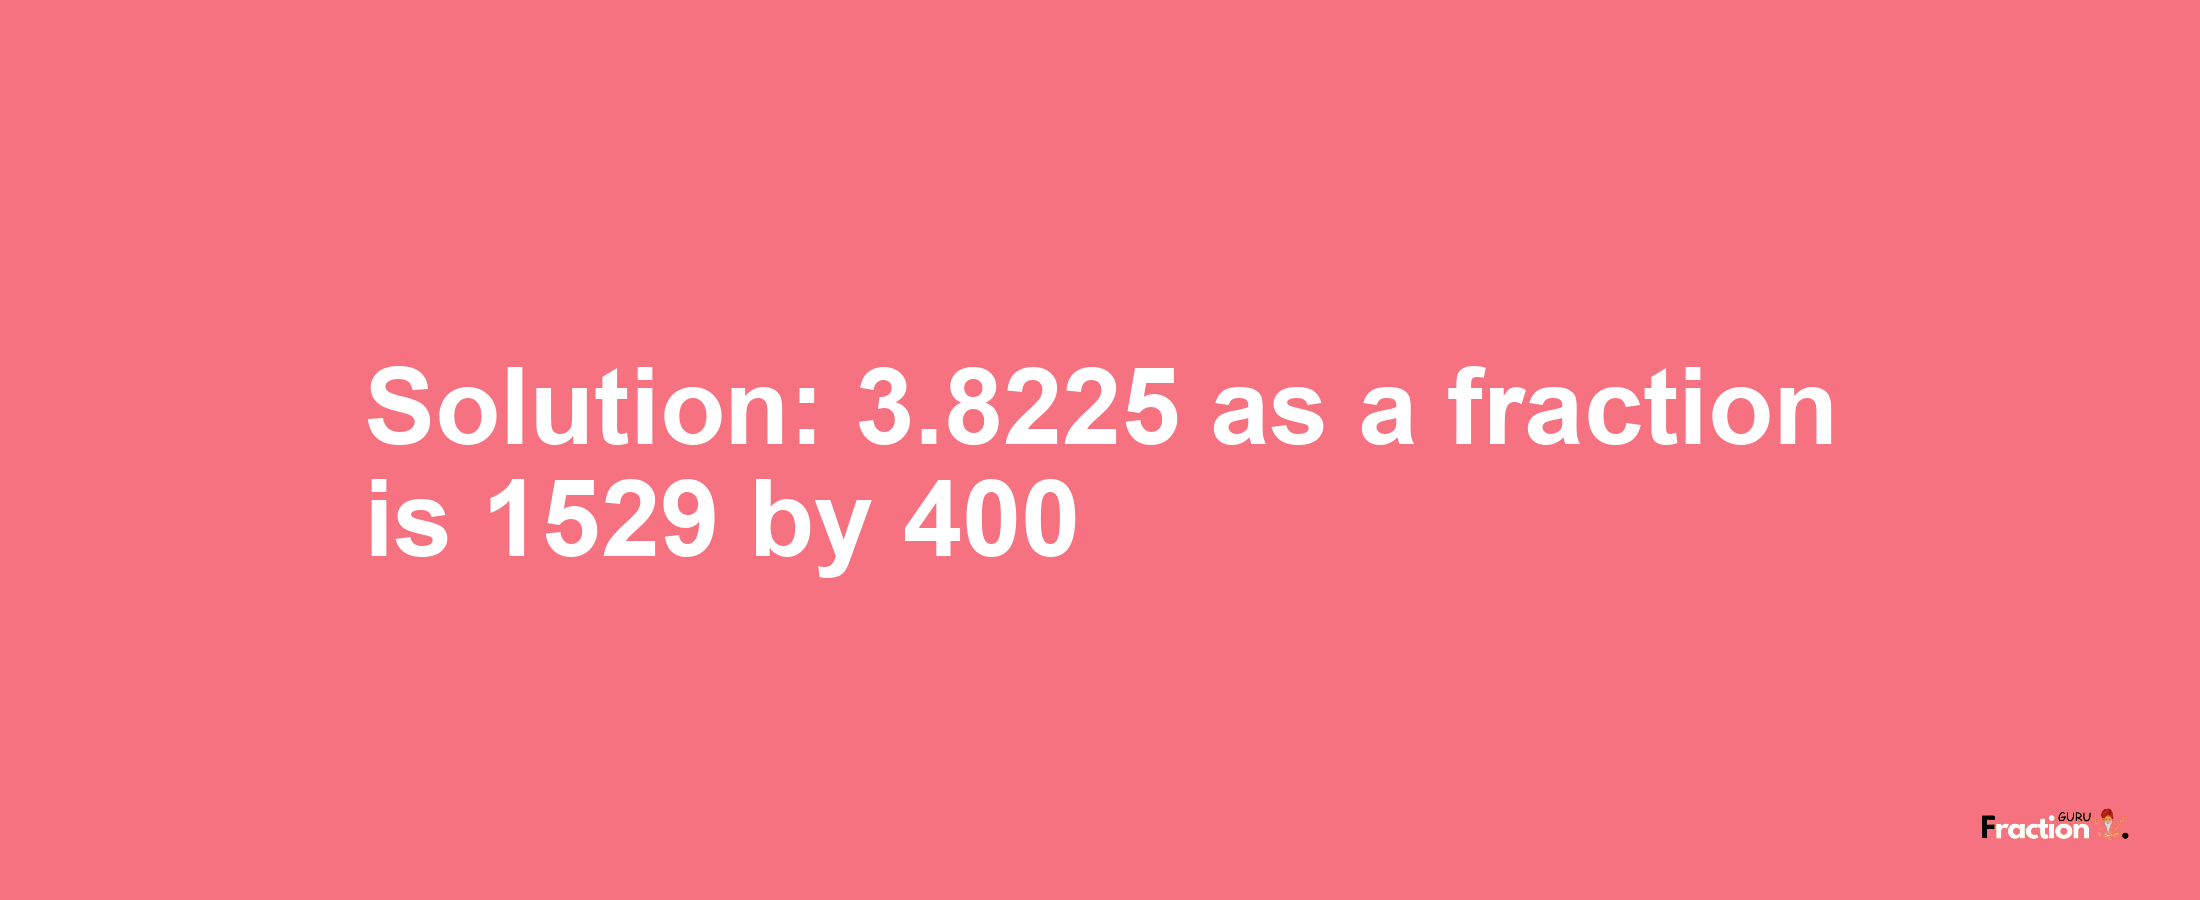 Solution:3.8225 as a fraction is 1529/400